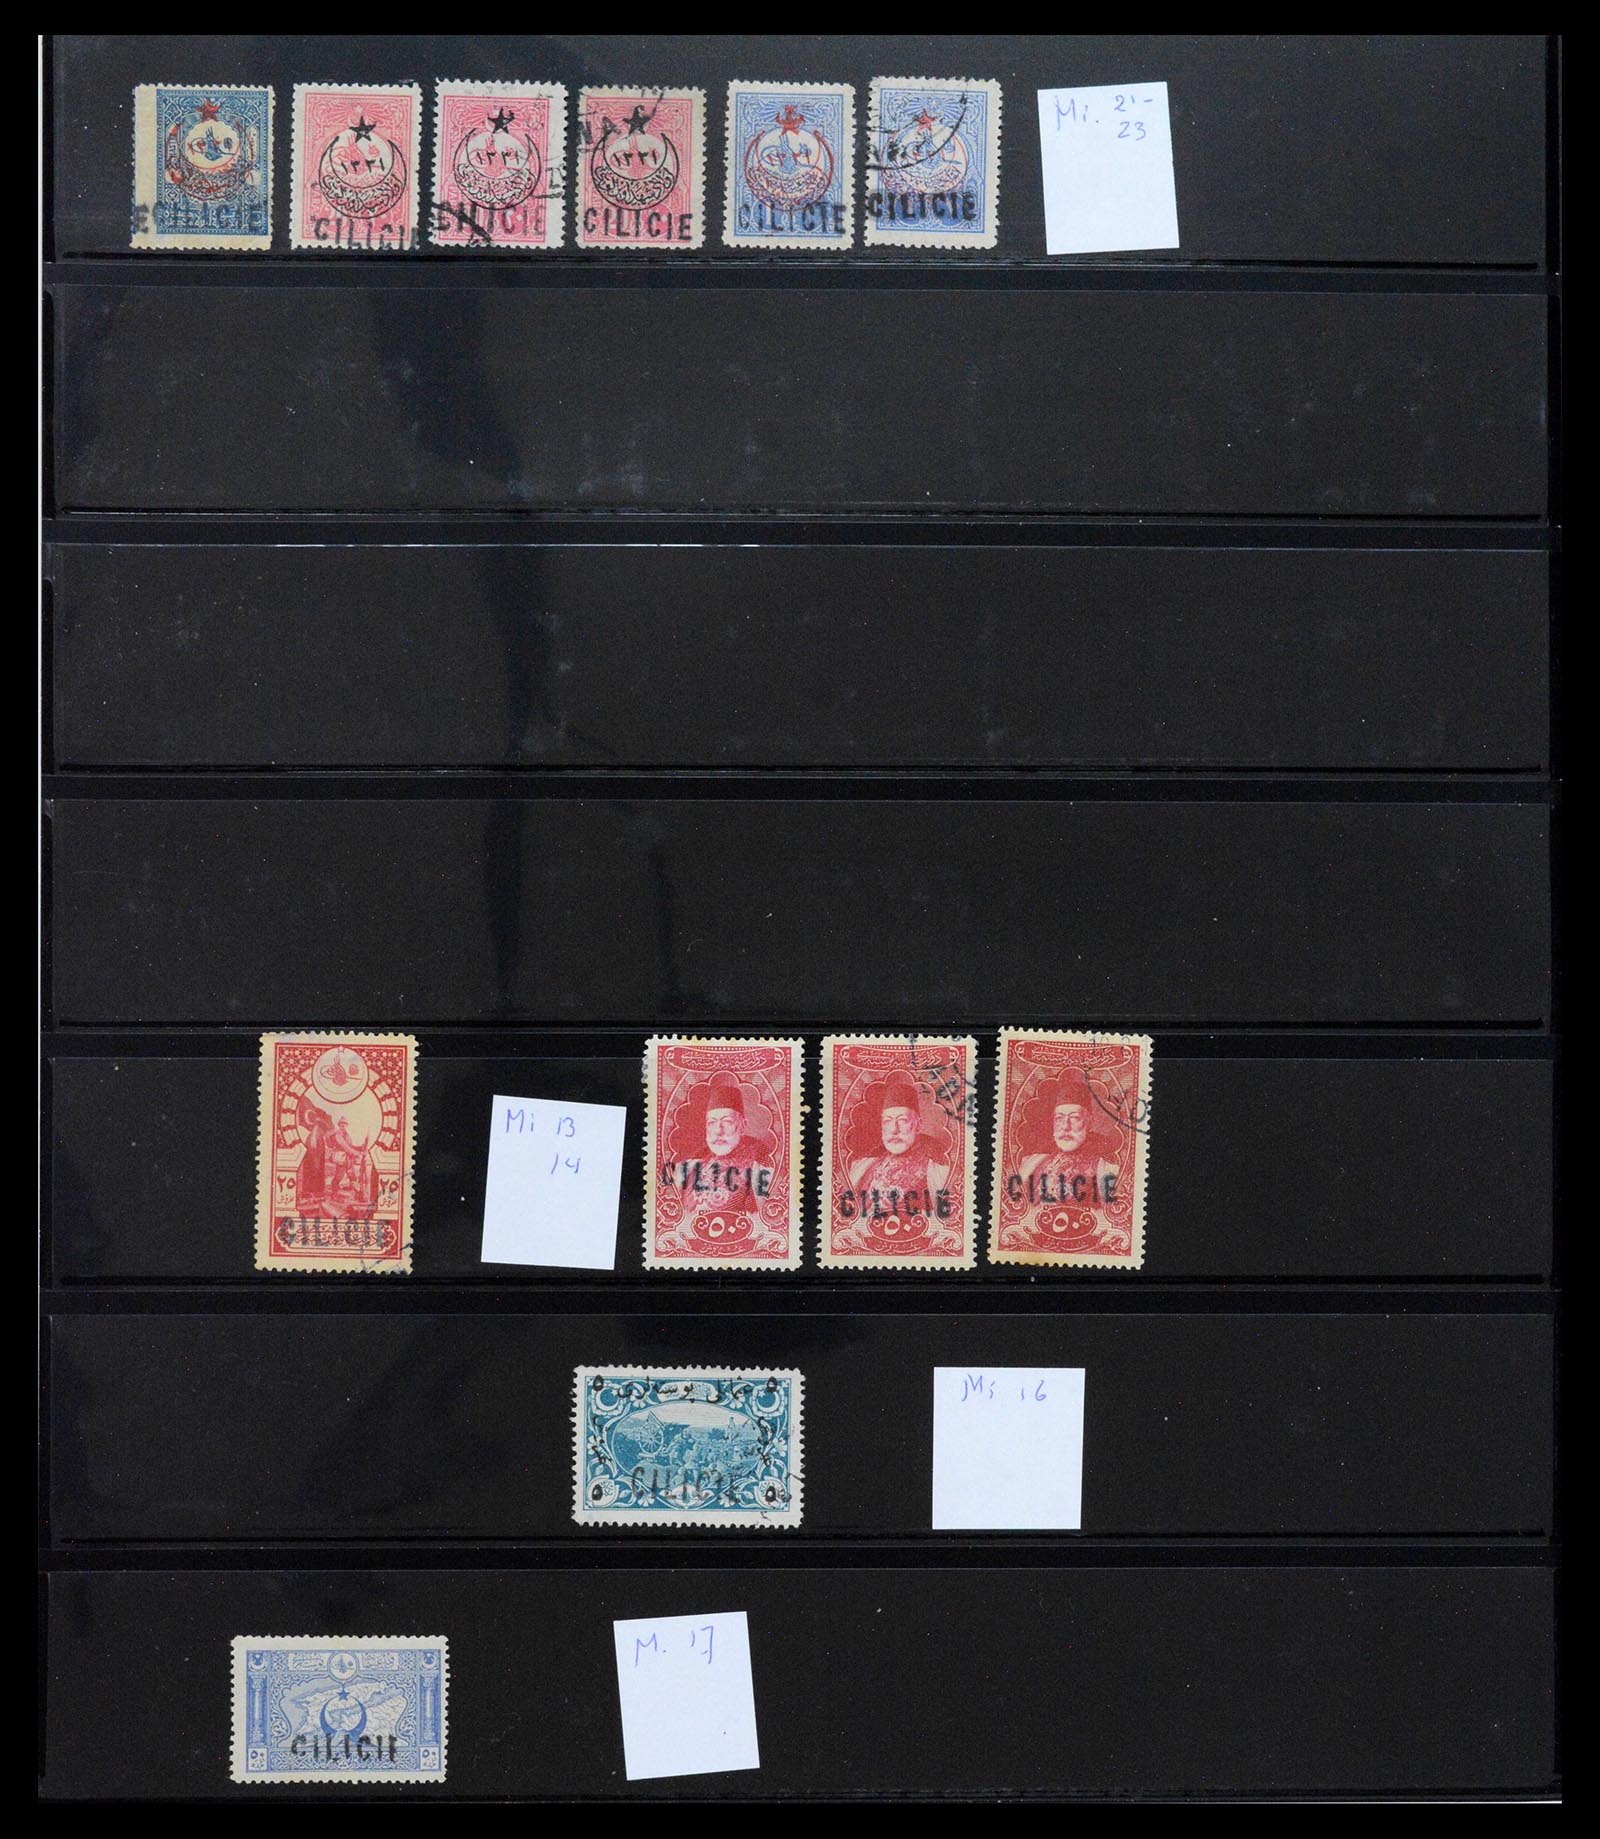 39457 0002 - Stamp collection 39457 Cilicia 1919-1921.